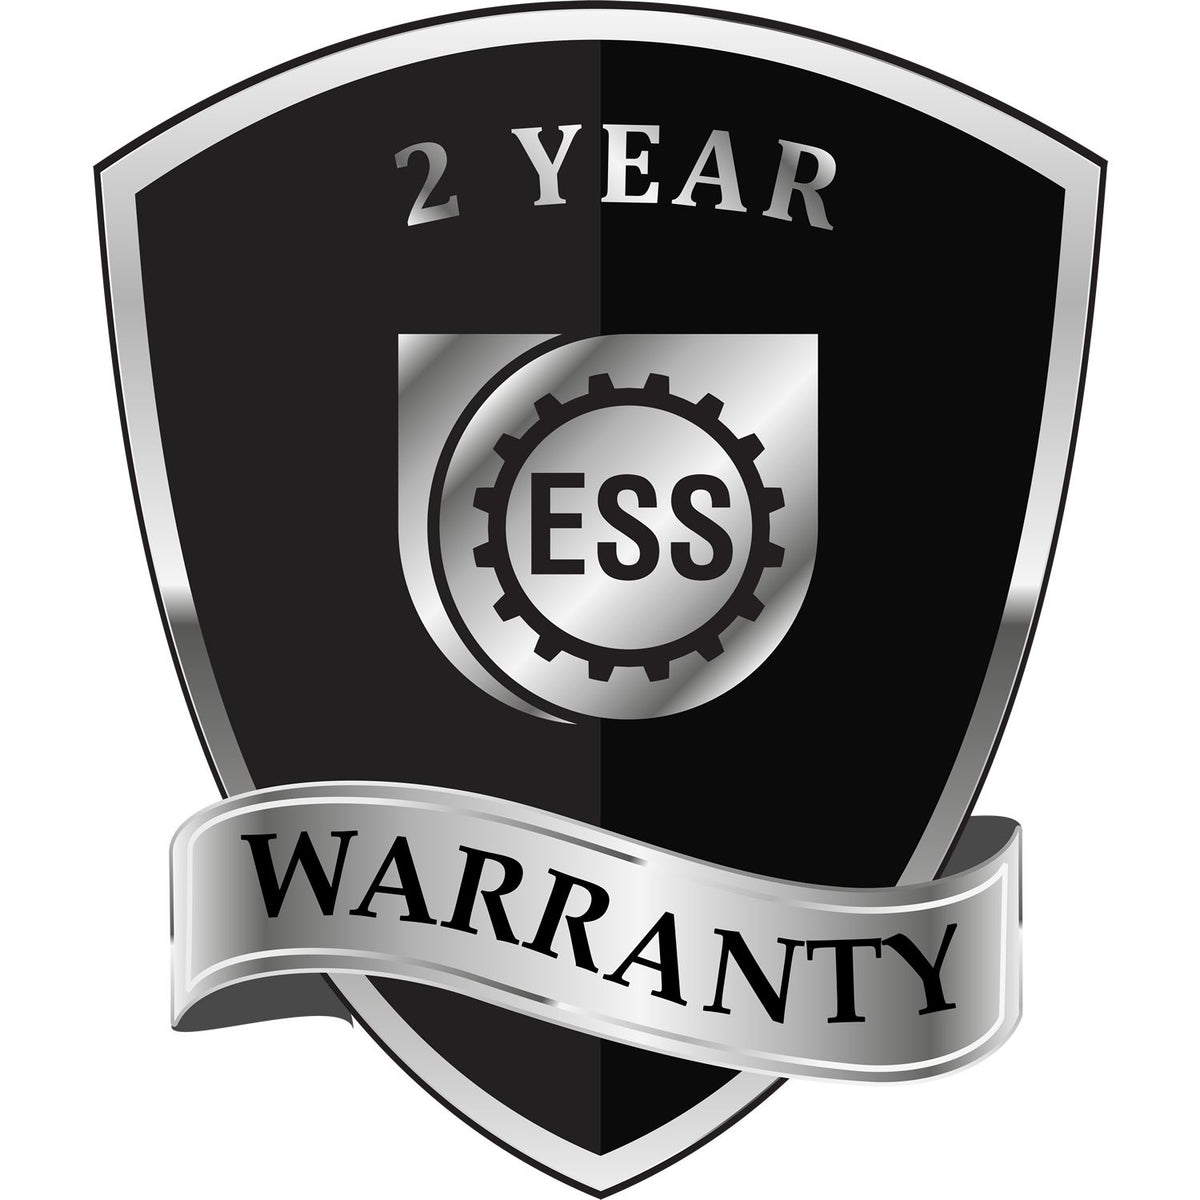 A badge or emblem showing a warranty icon for the Long Reach Utah PE Seal